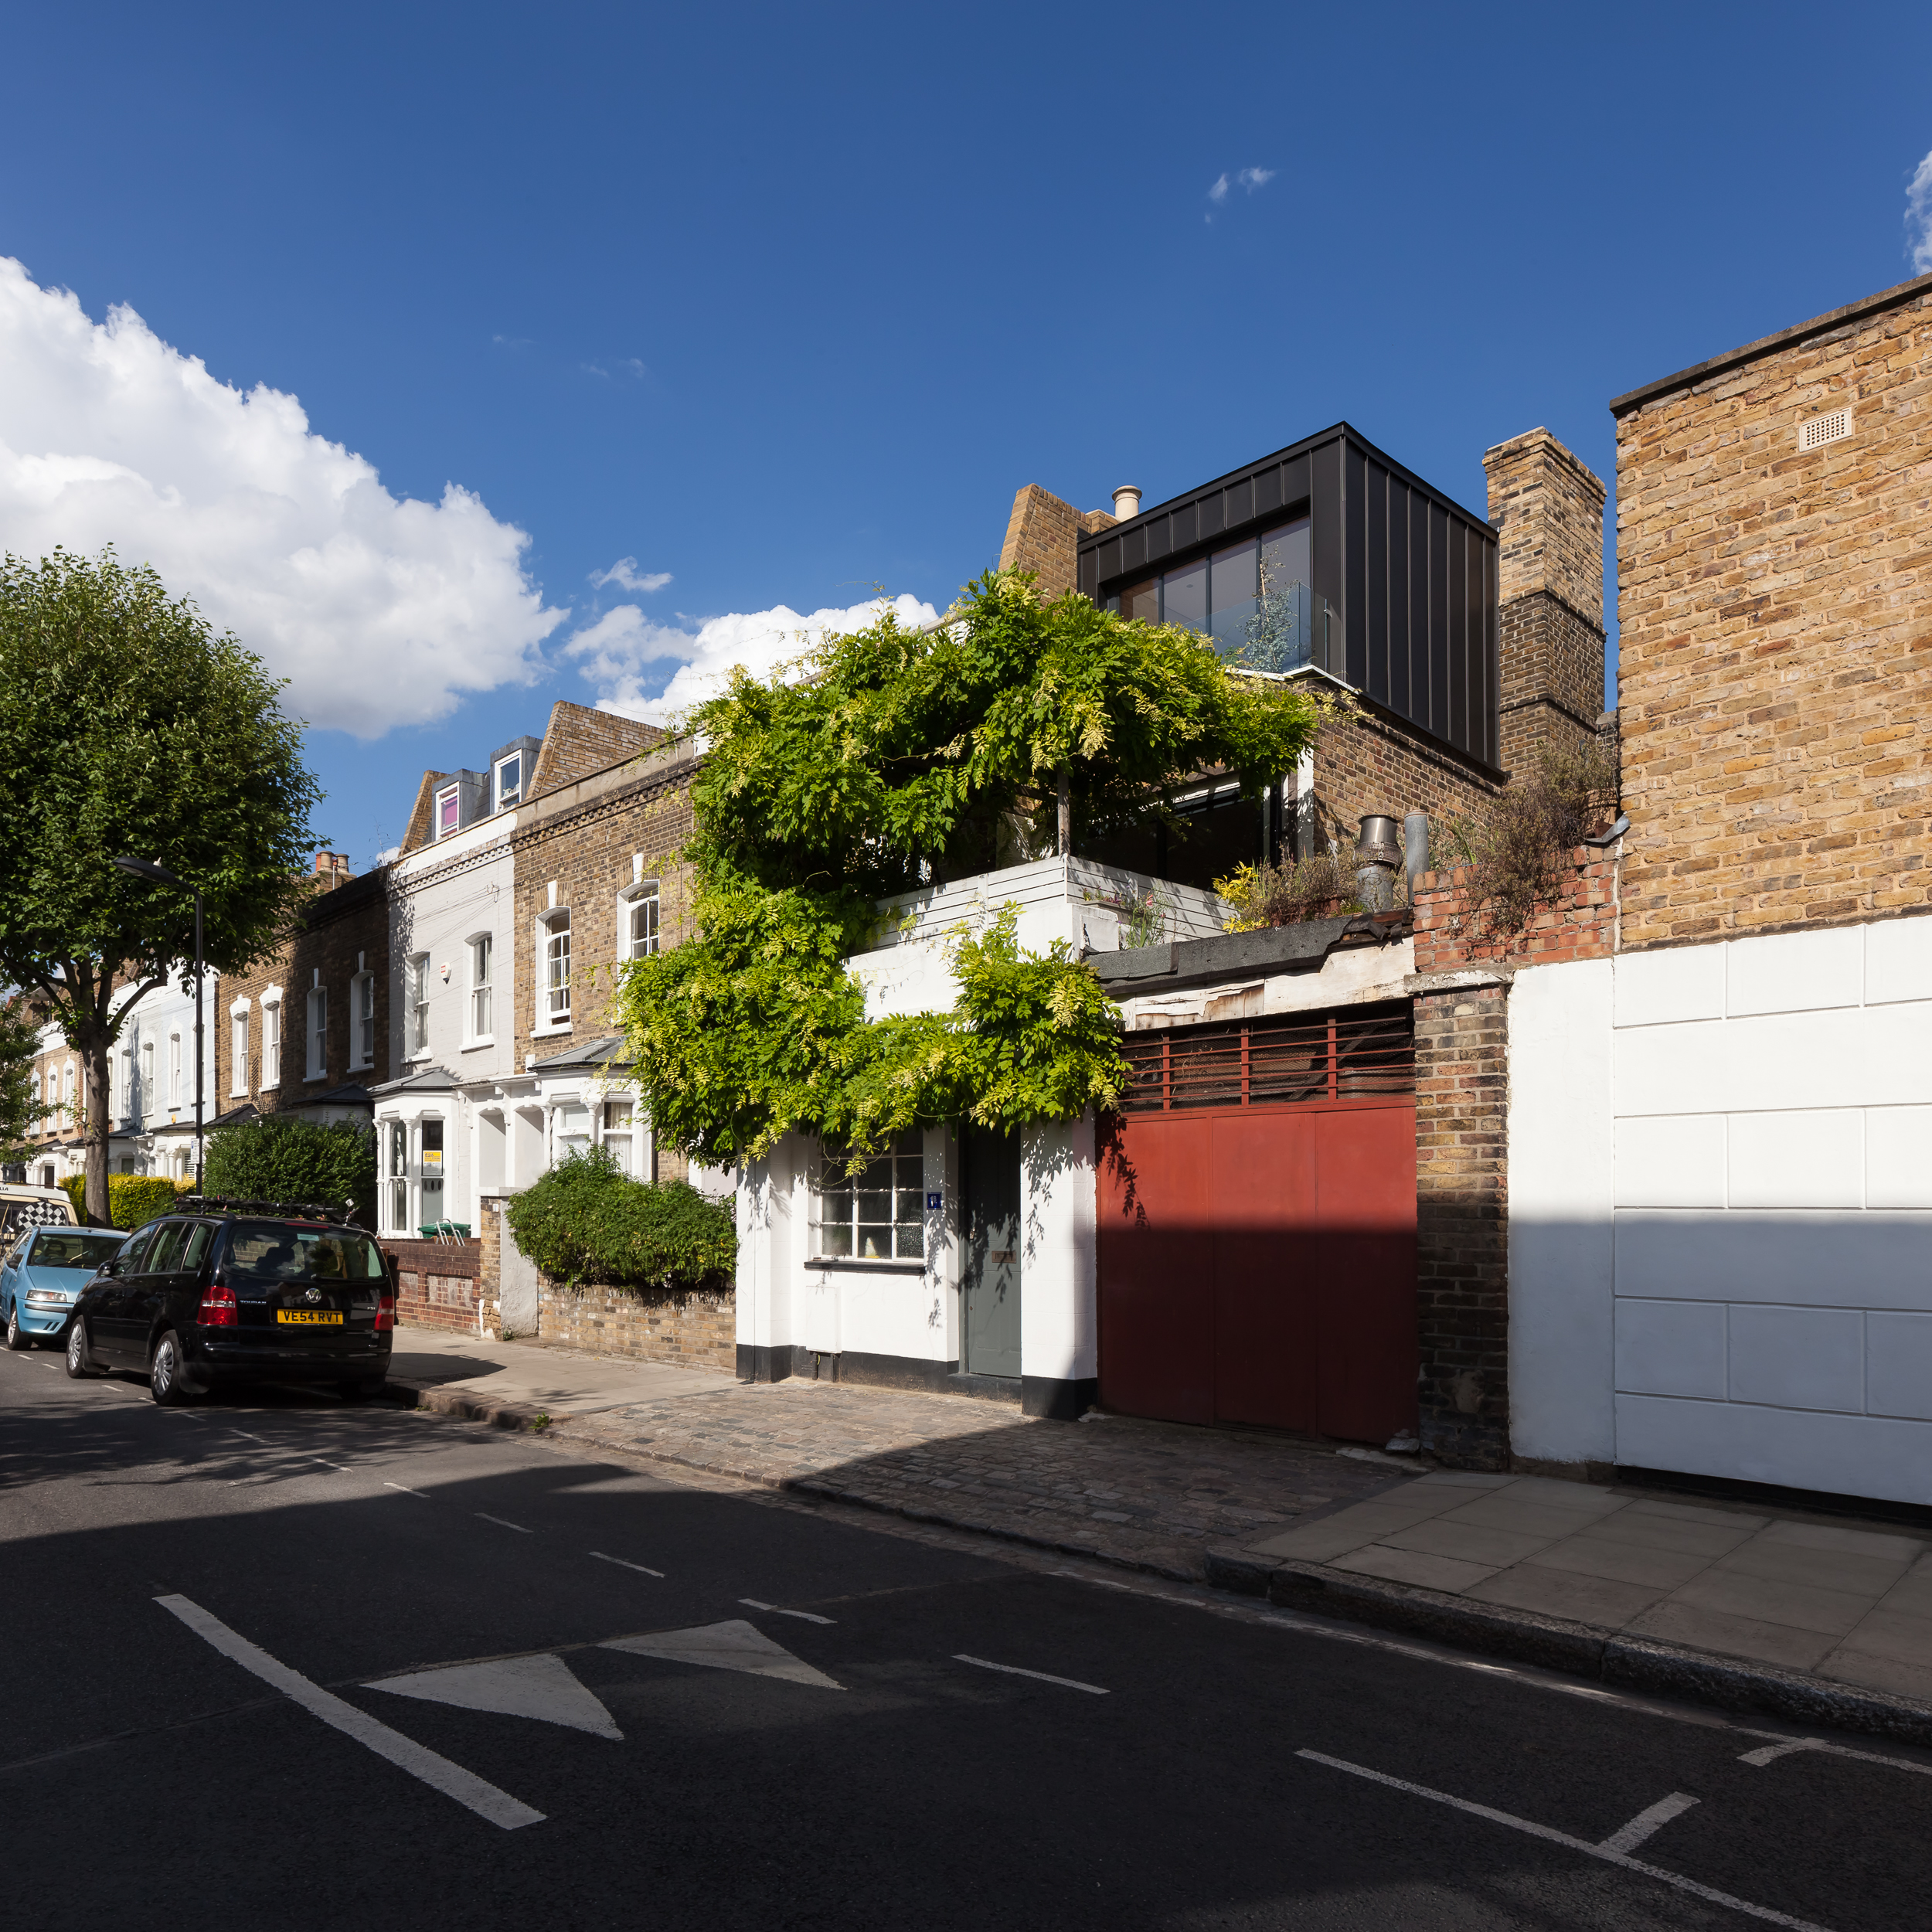 Pano_8577_8579-Edit - A+Architecture_Oldfield_Road.jpg